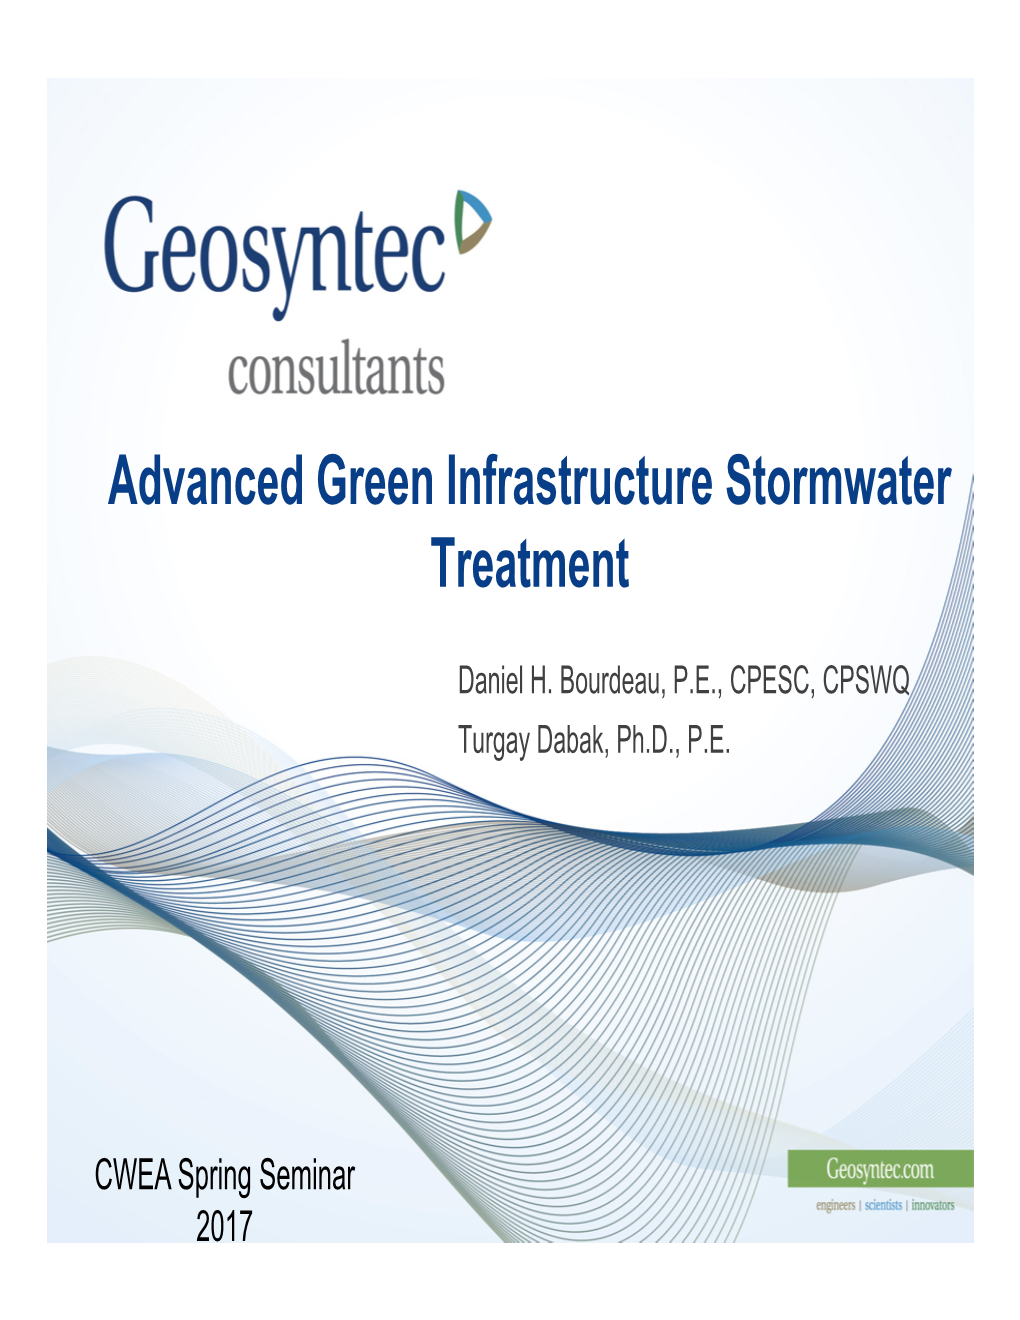 Advanced Green Infrastructure Stormwater Treatment